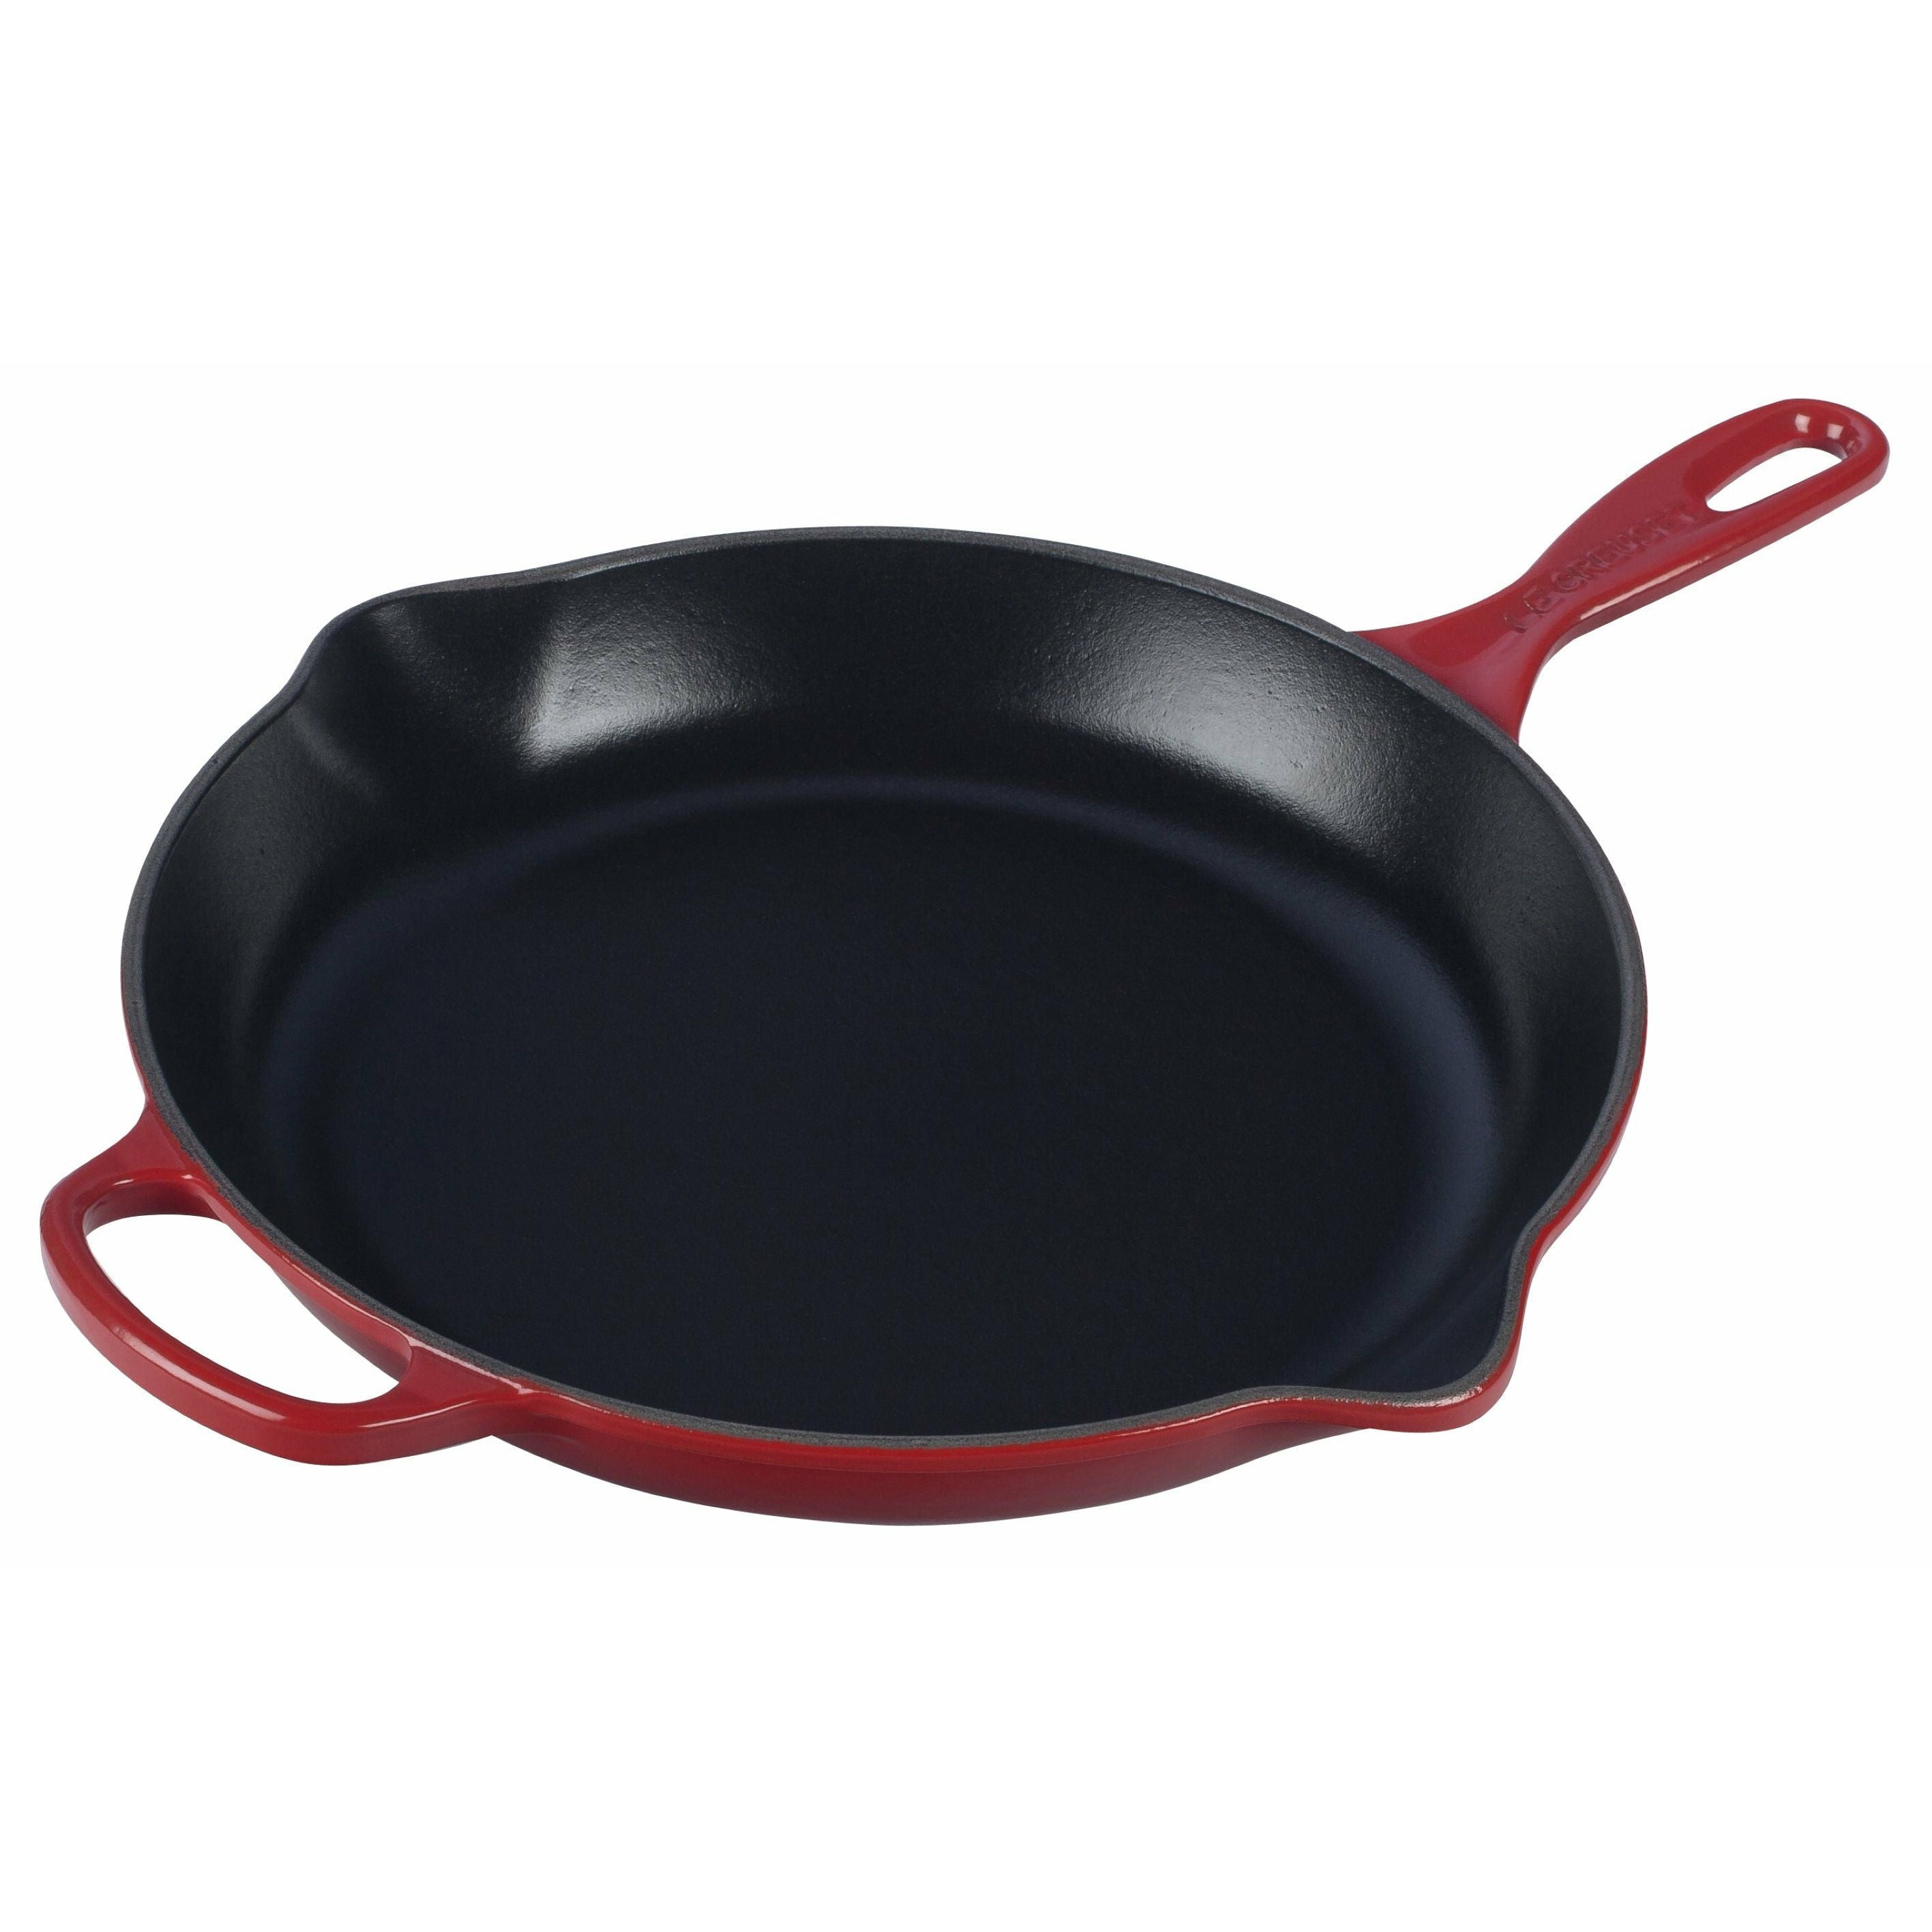 Le Creuset Signature Round Frying And Serving Pan 23 Cm, Cherry Red